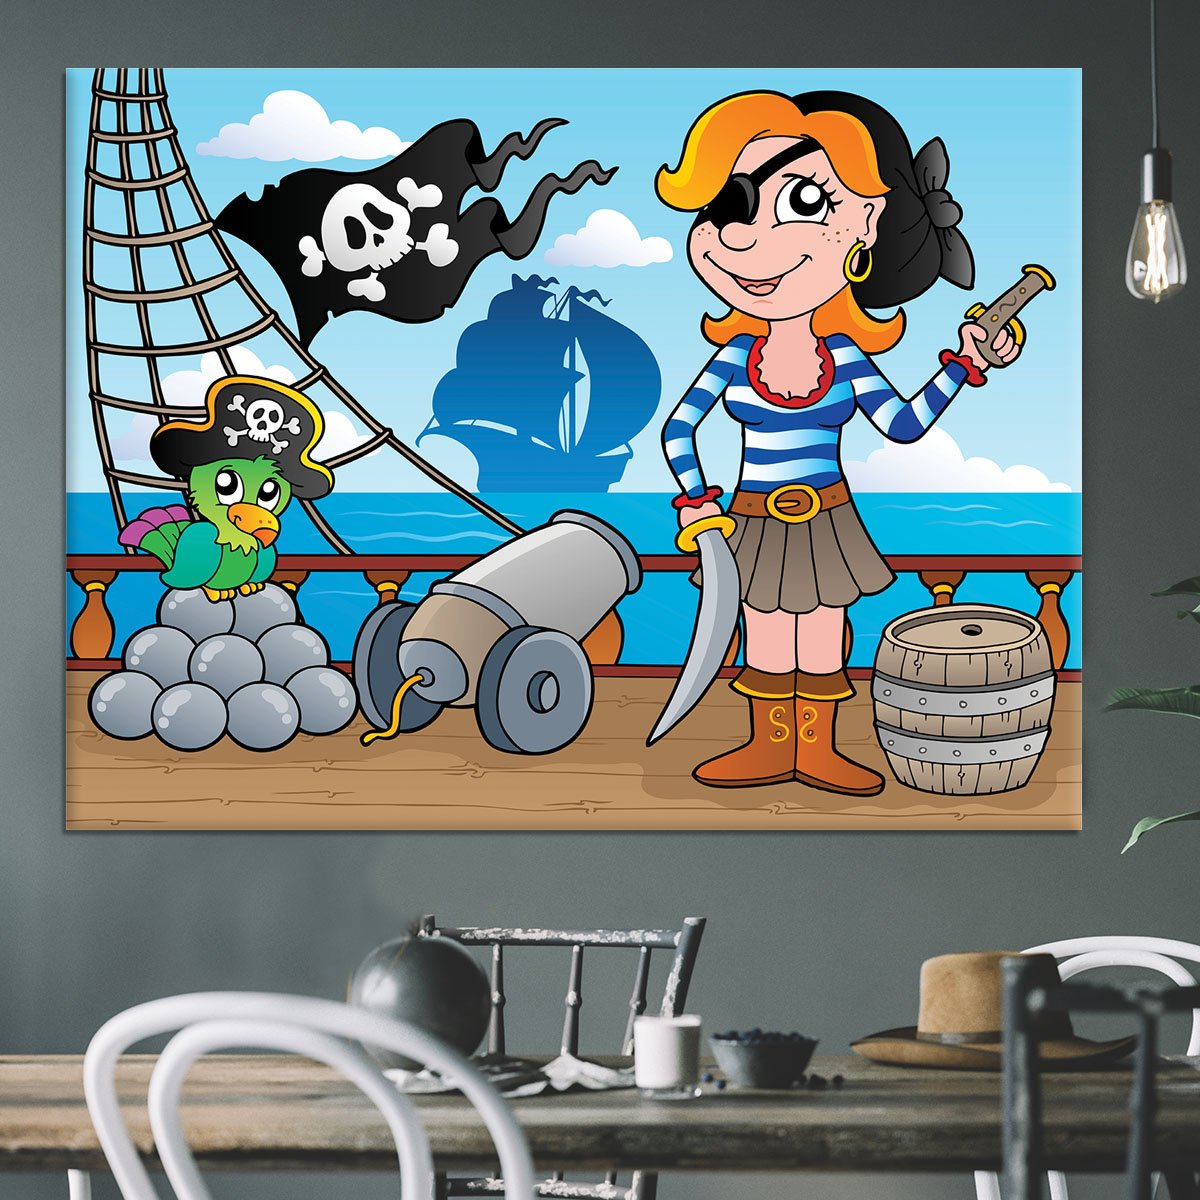 Pirate ship deck theme 8 Canvas Print or Poster